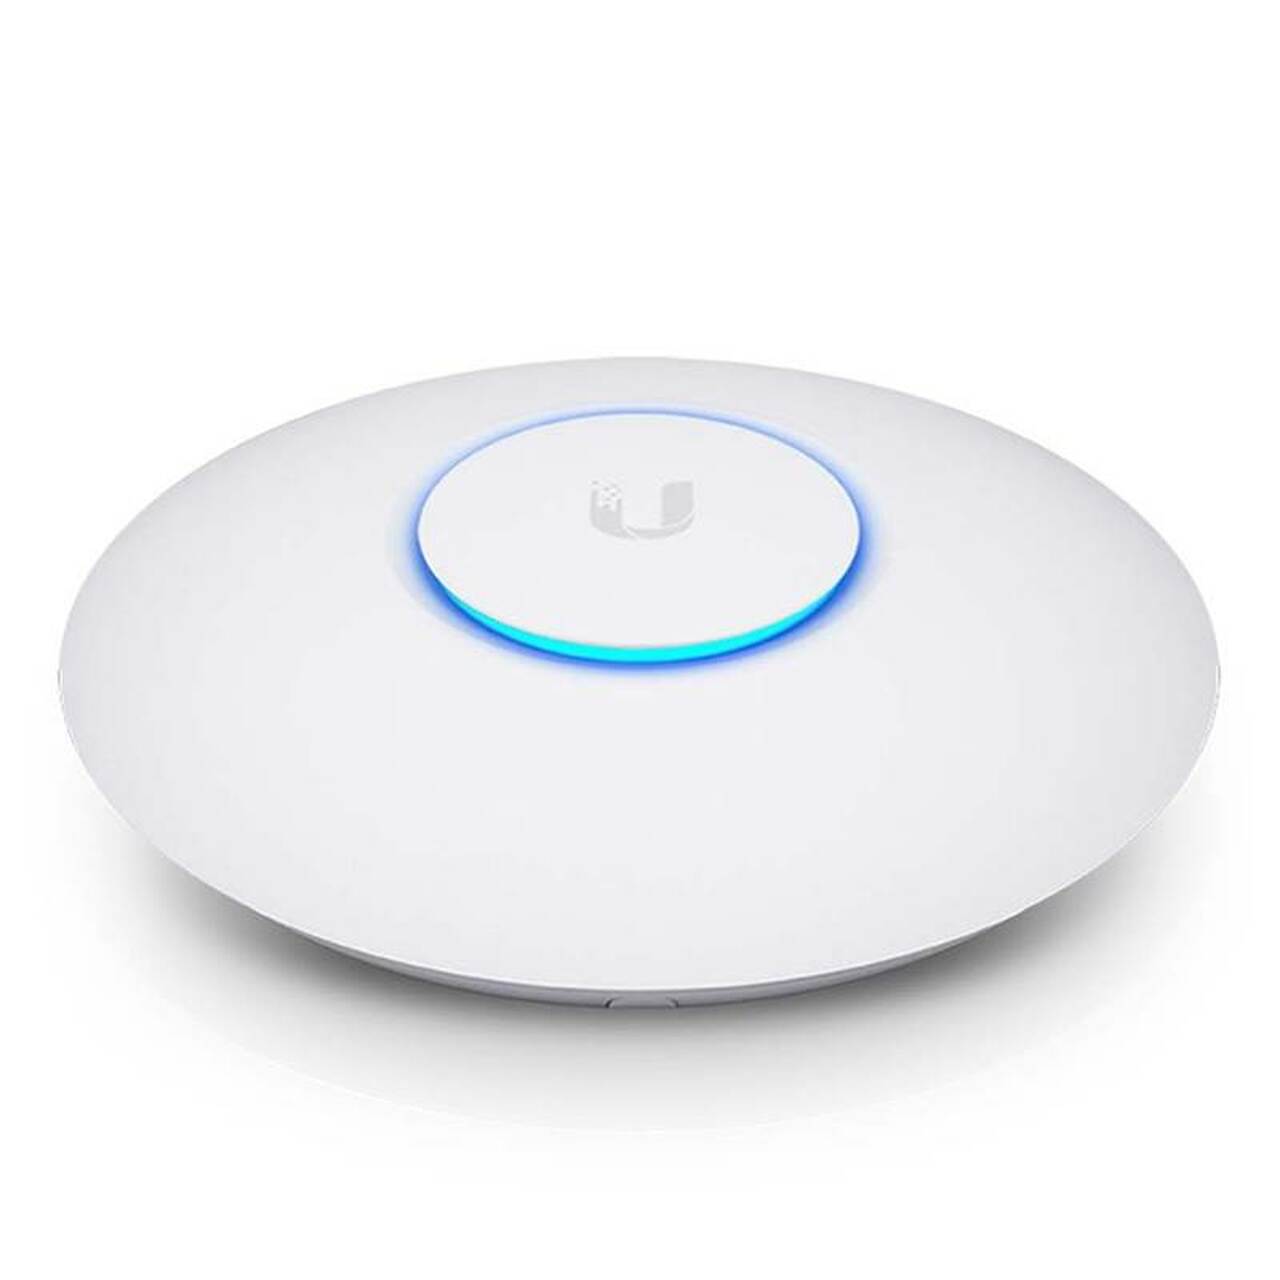 Ubiquiti Unifi Compact 802.11ac Wave2 MU-MIMO Enterprise Access Point (POE-NOT Included) - Upgrade from AC-PRO